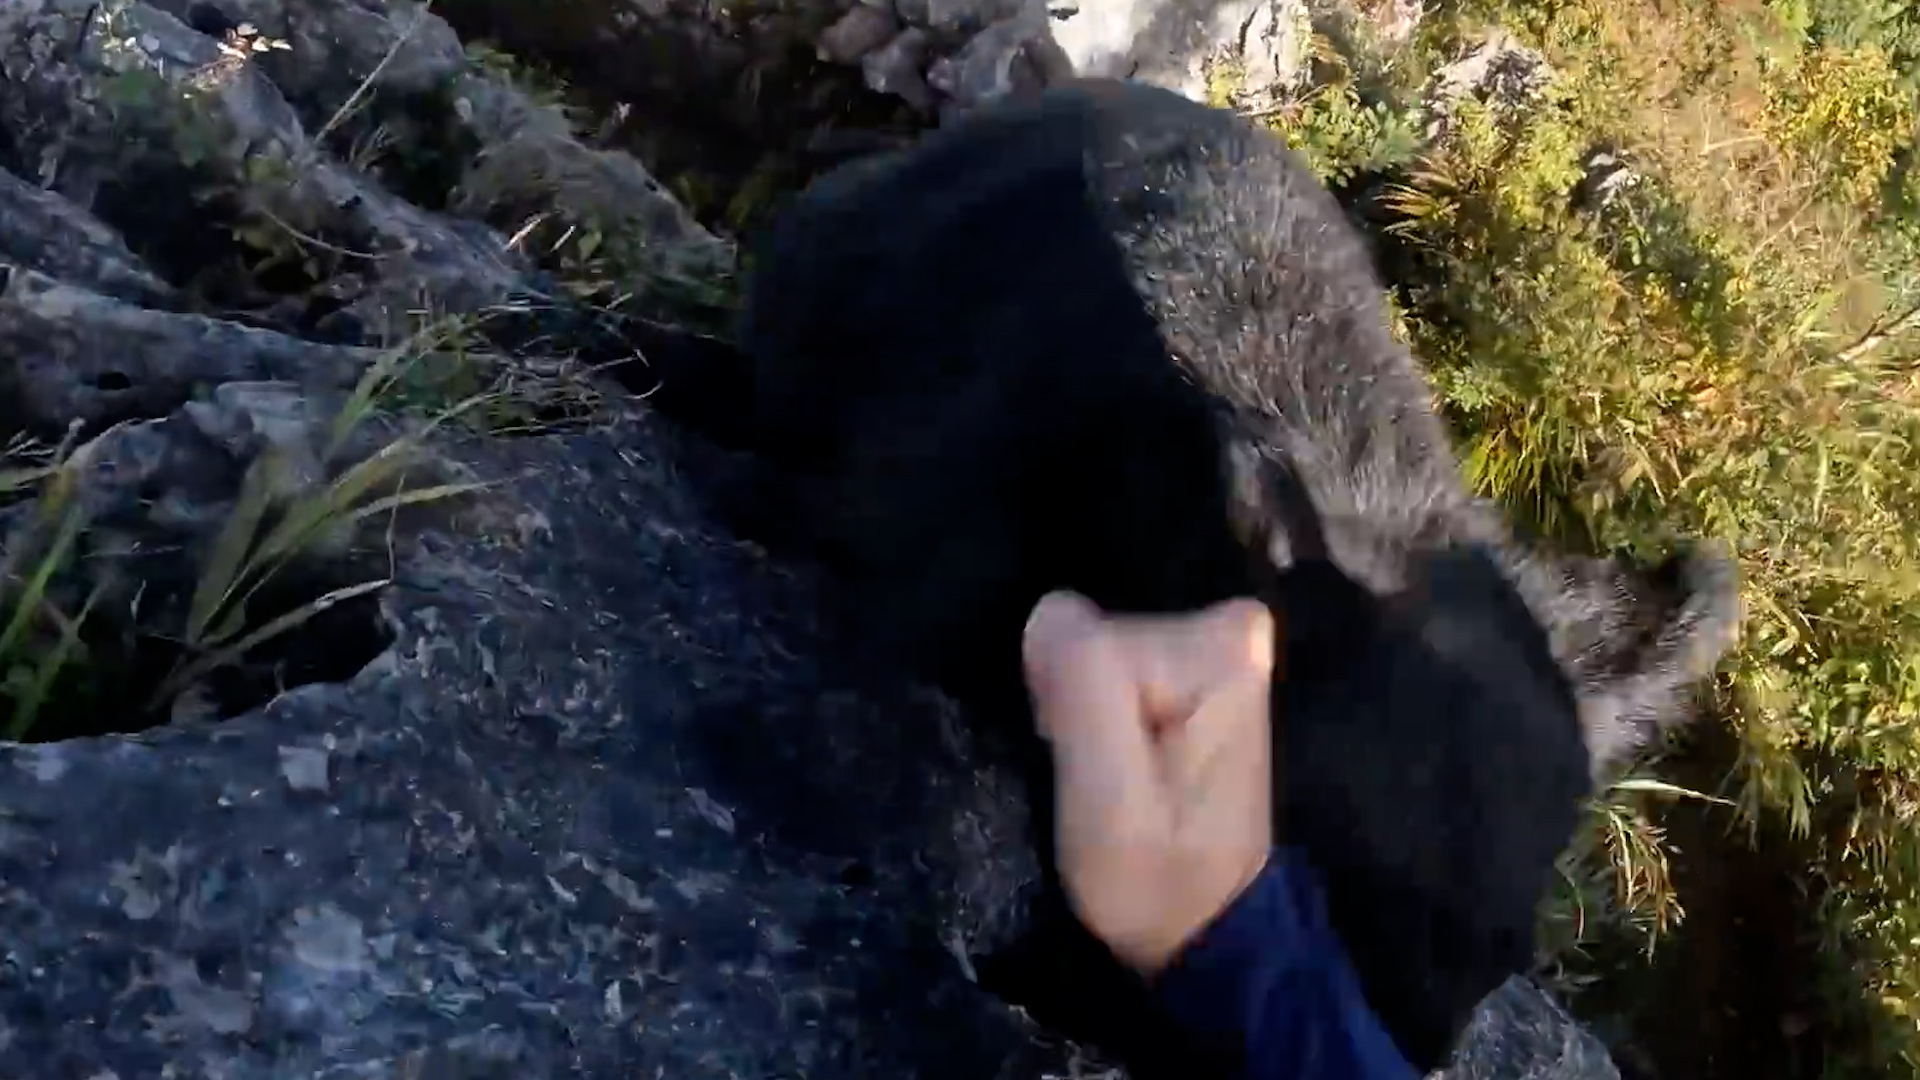 The man dealt several blows to the bear in self-defense